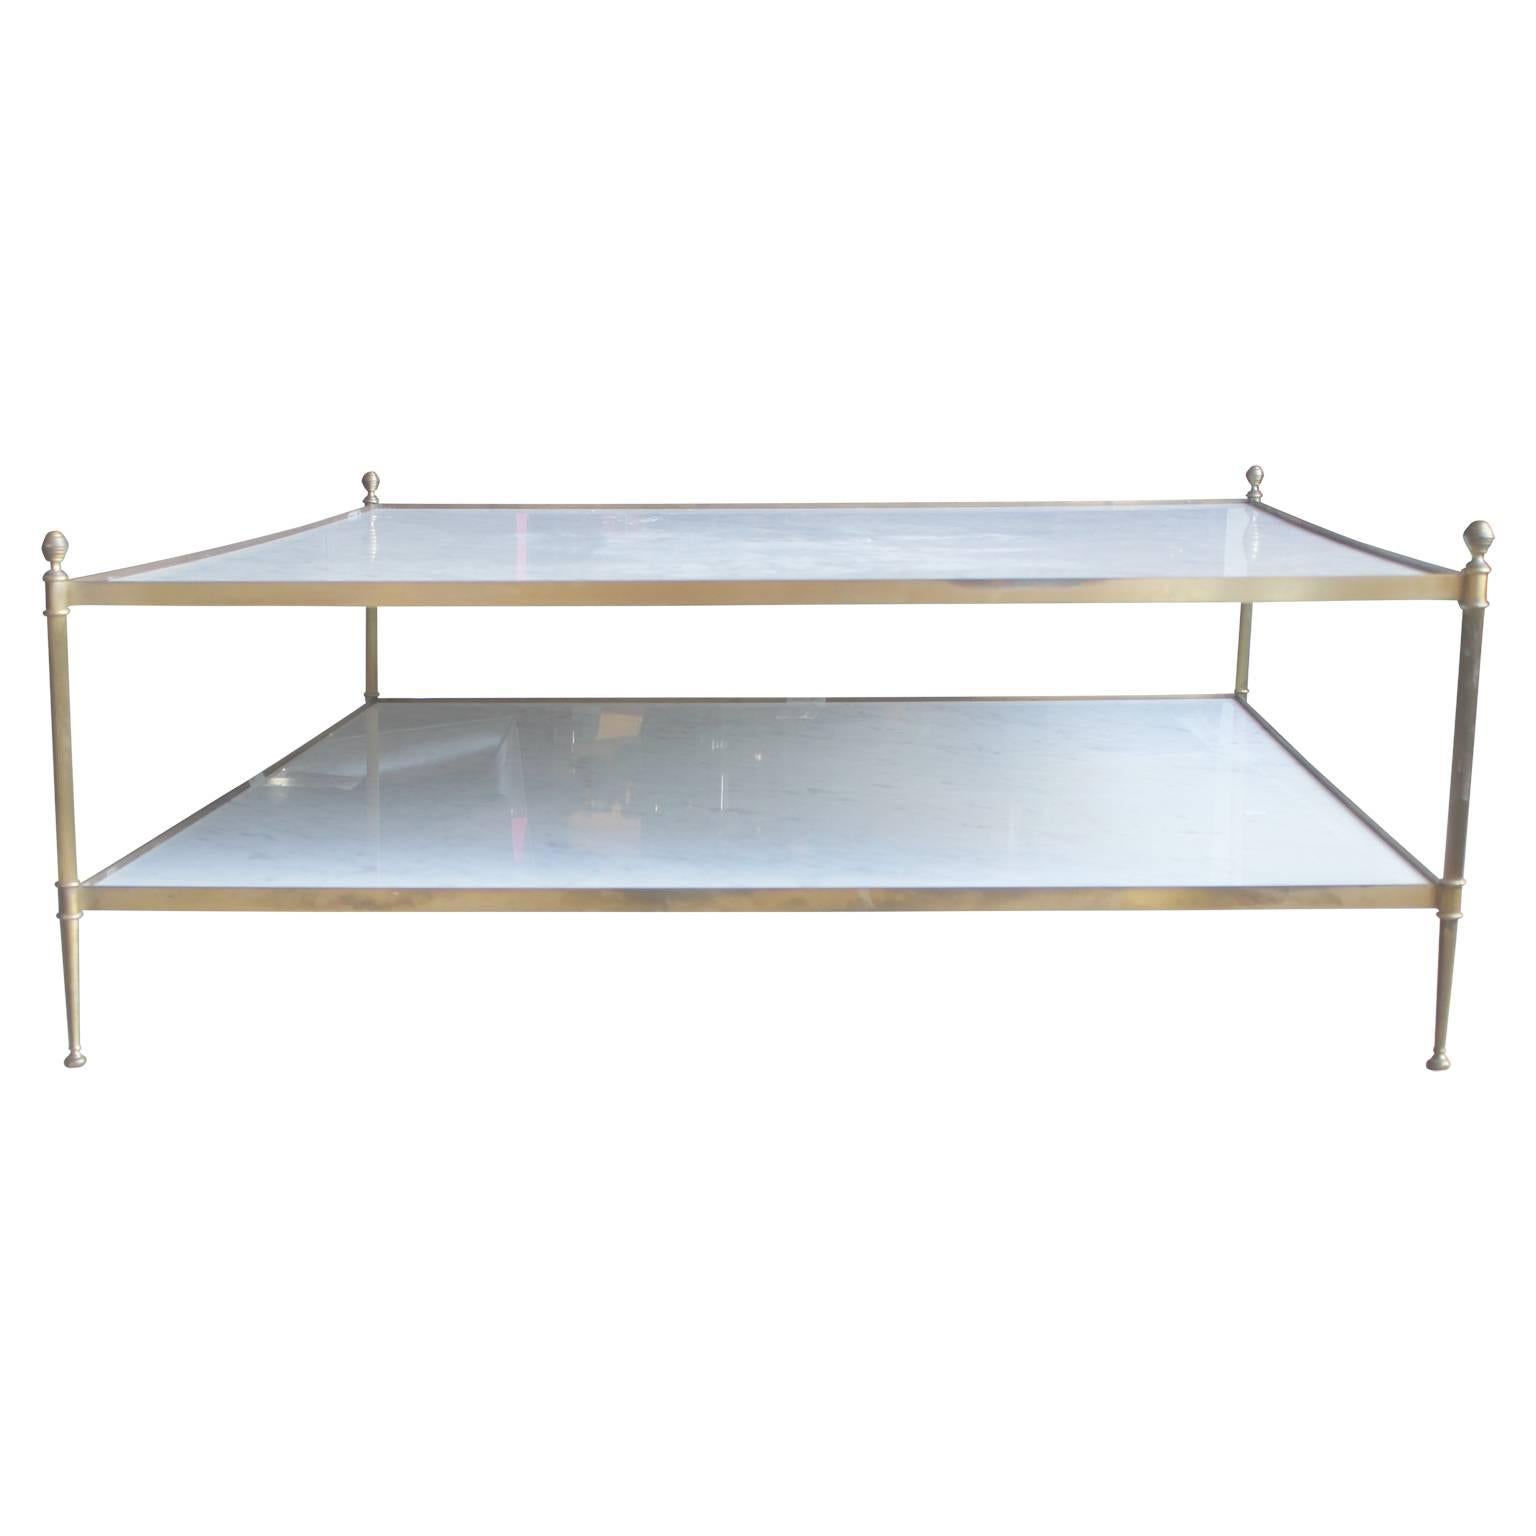 Mid-20th Century Hollywood Regency Italian Marble and Brass Two-Tiered Square Coffee Table